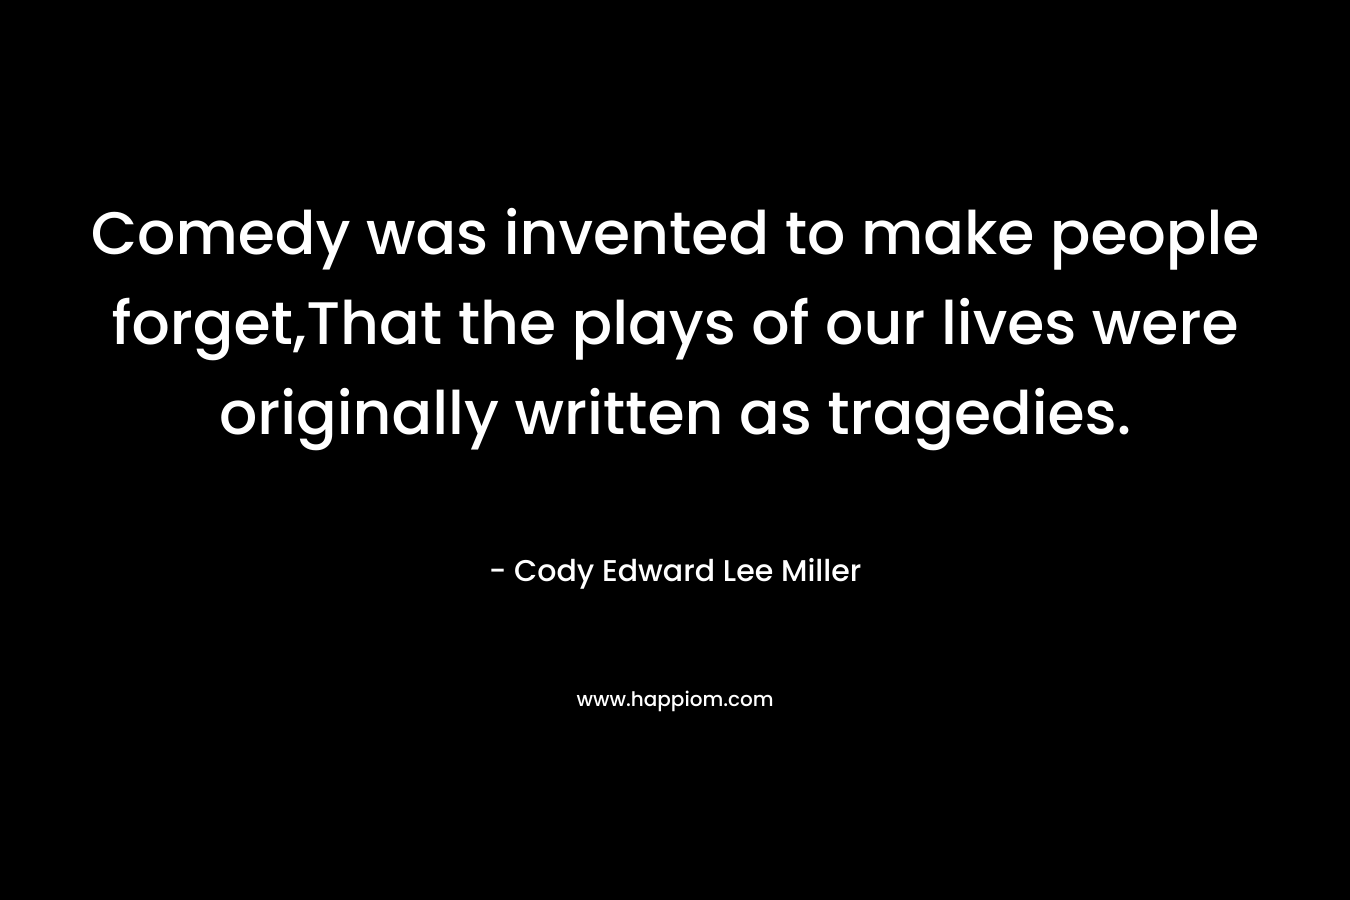 Comedy was invented to make people forget,That the plays of our lives were originally written as tragedies. – Cody Edward Lee Miller